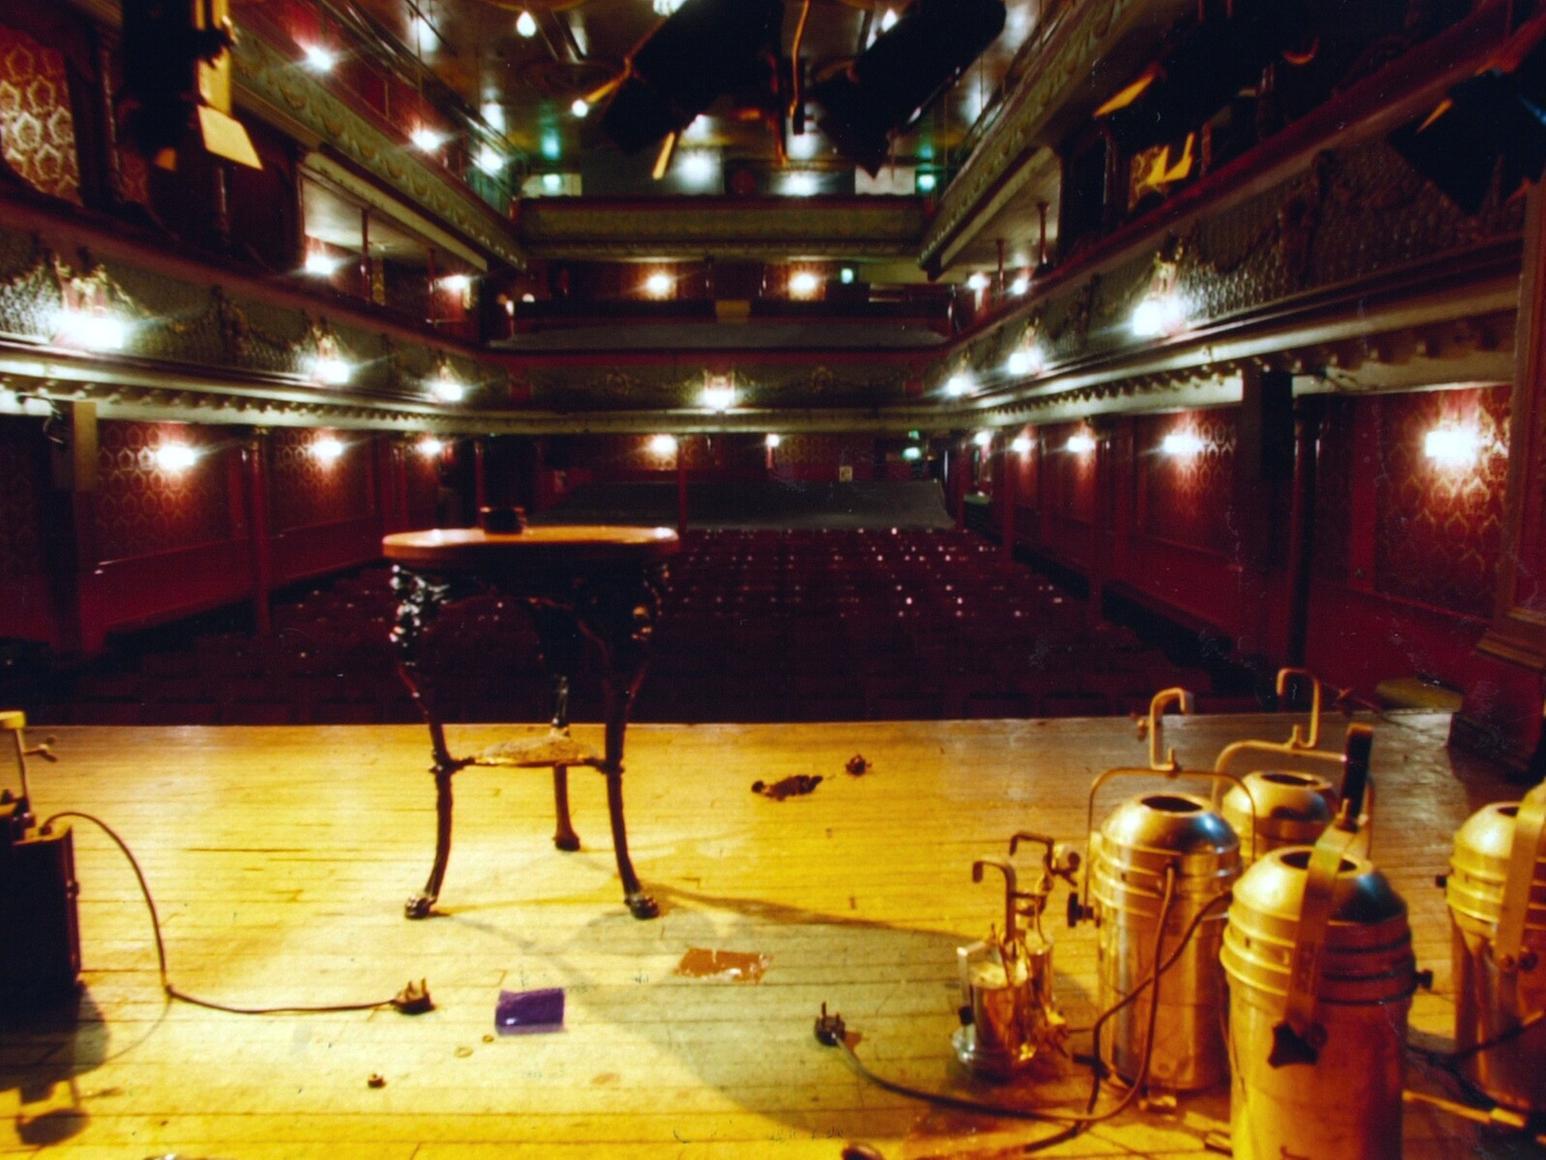 Does this look familiar? Leeds City Varieties which was in desperate need of a revamp.